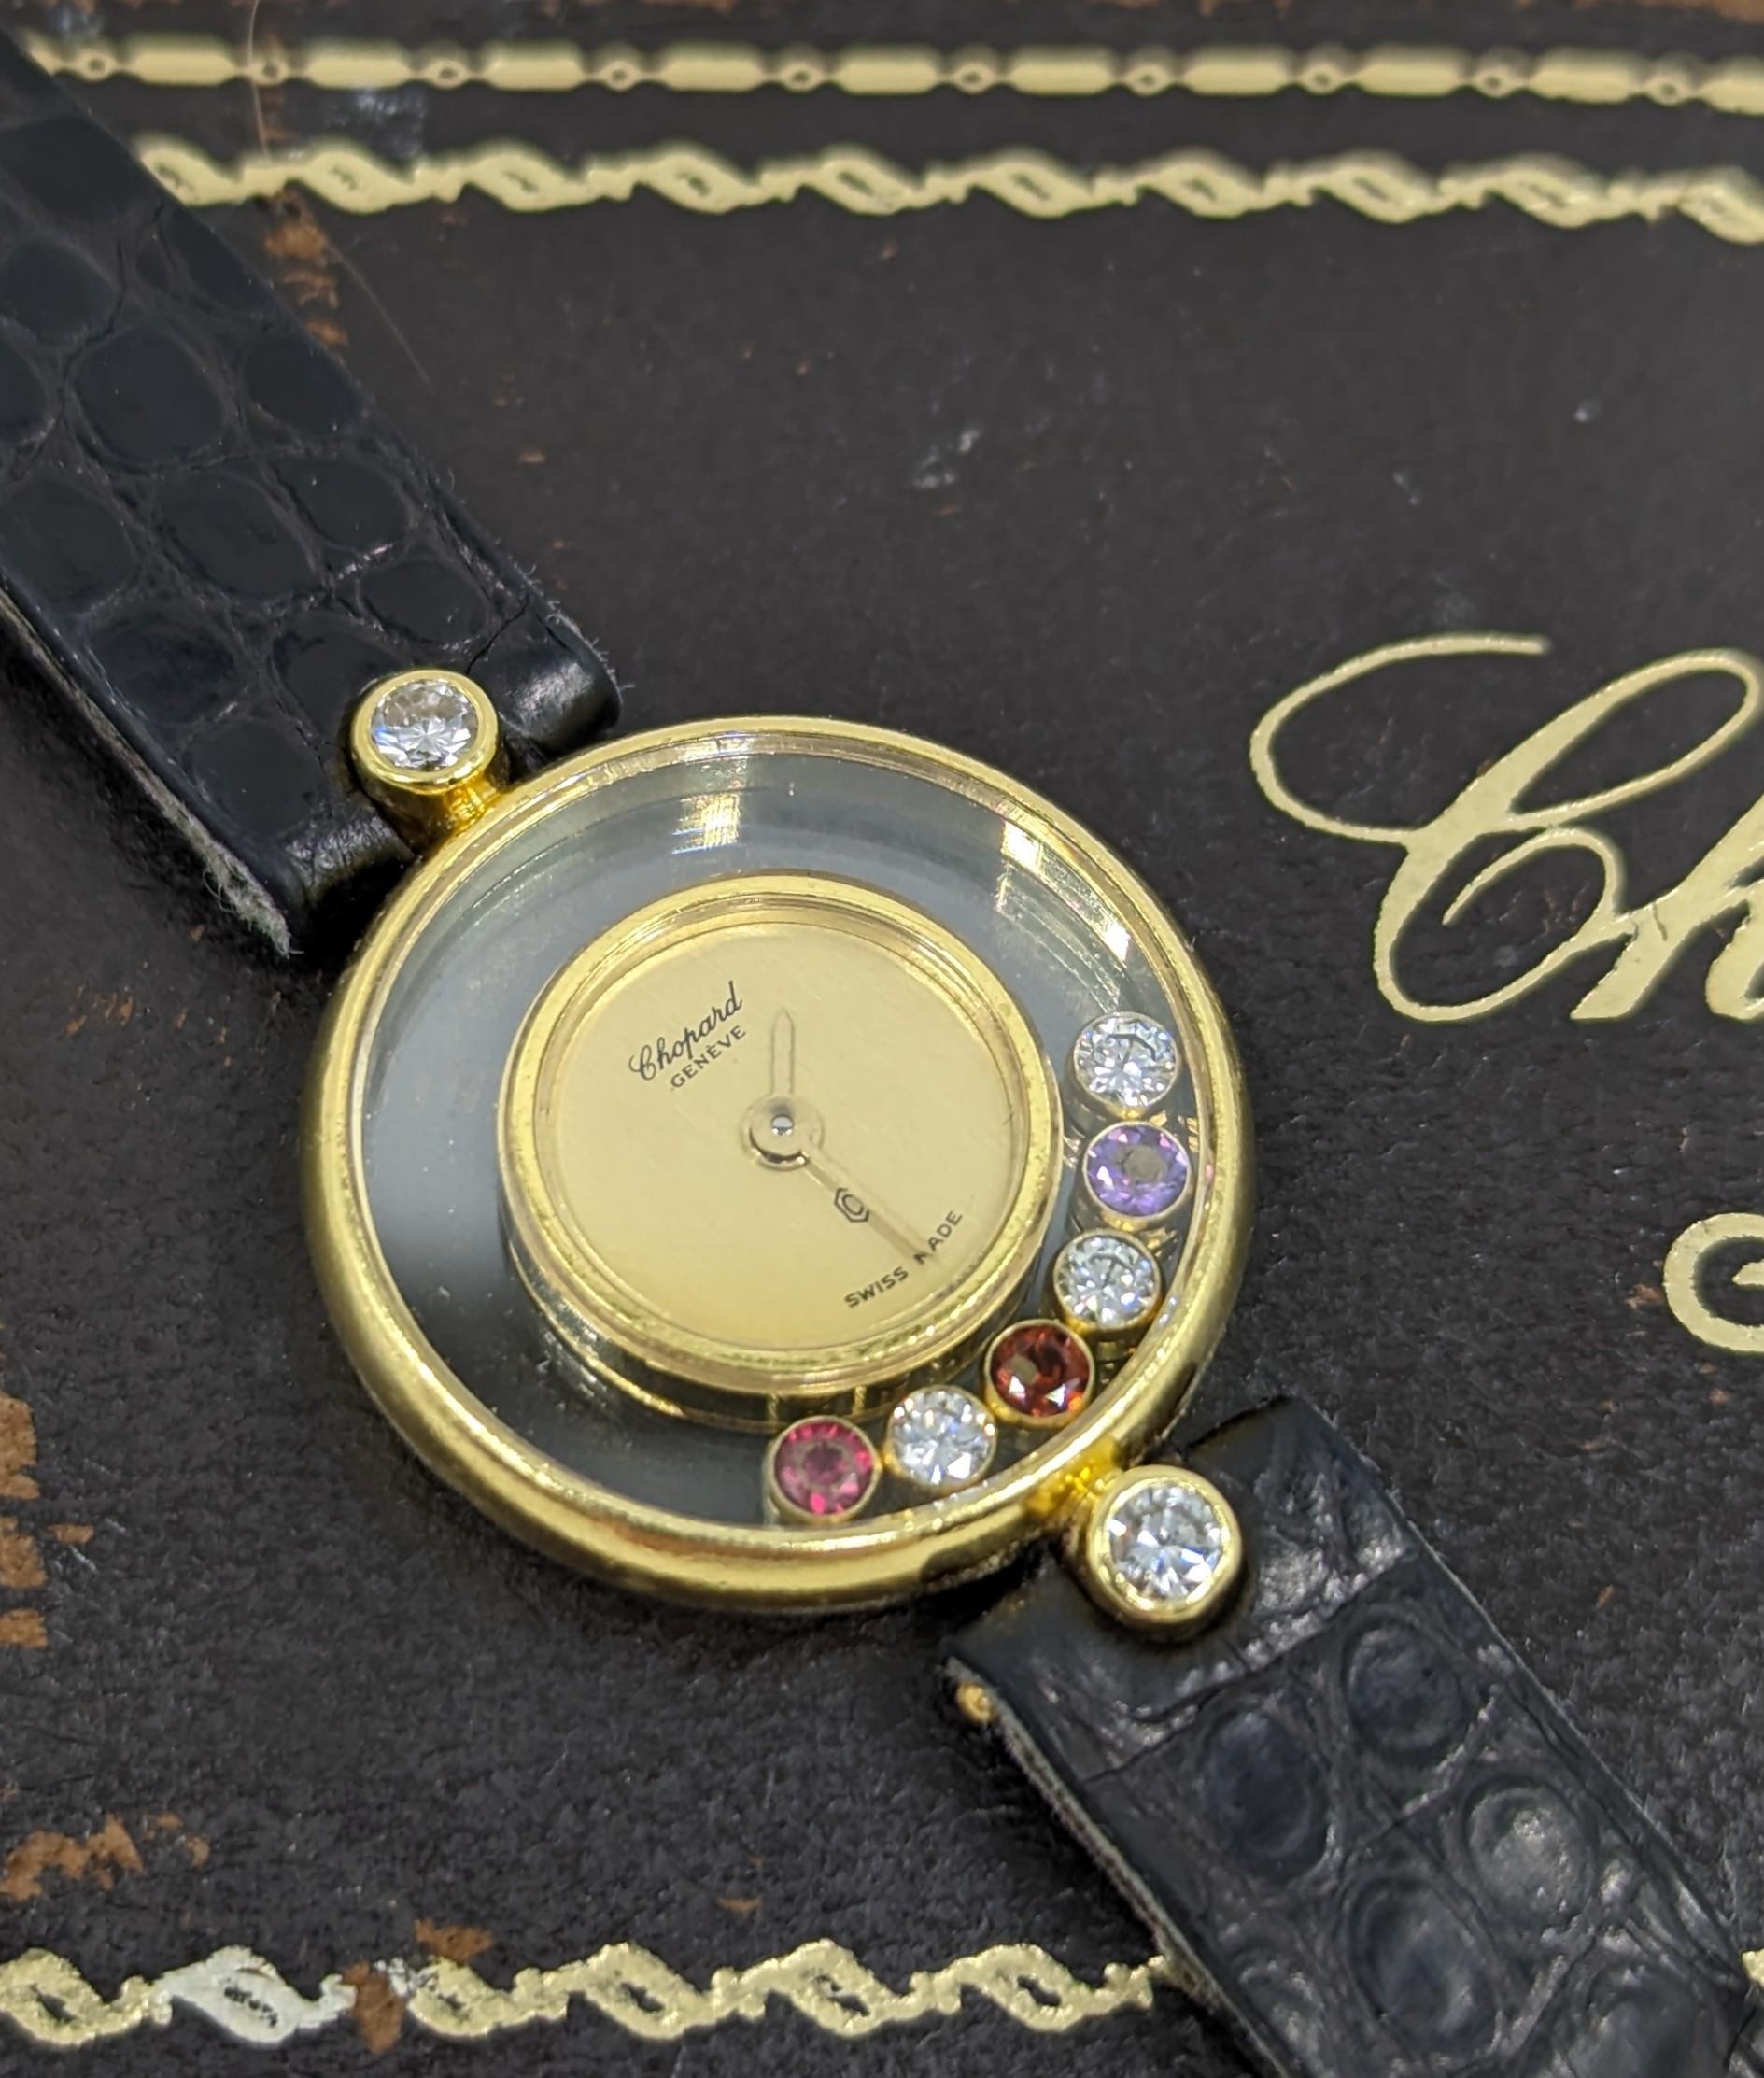 A fine and rare Chopard 18K solid yellow gold “HAPPY DIAMONDS” (ref. 20.4069) quartz watch with 8 multi-colored gems and diamonds (6 floating, estimated total diamond weight 0.24ct), original gold plaque Chopard buckle.

Comes with original Chopard